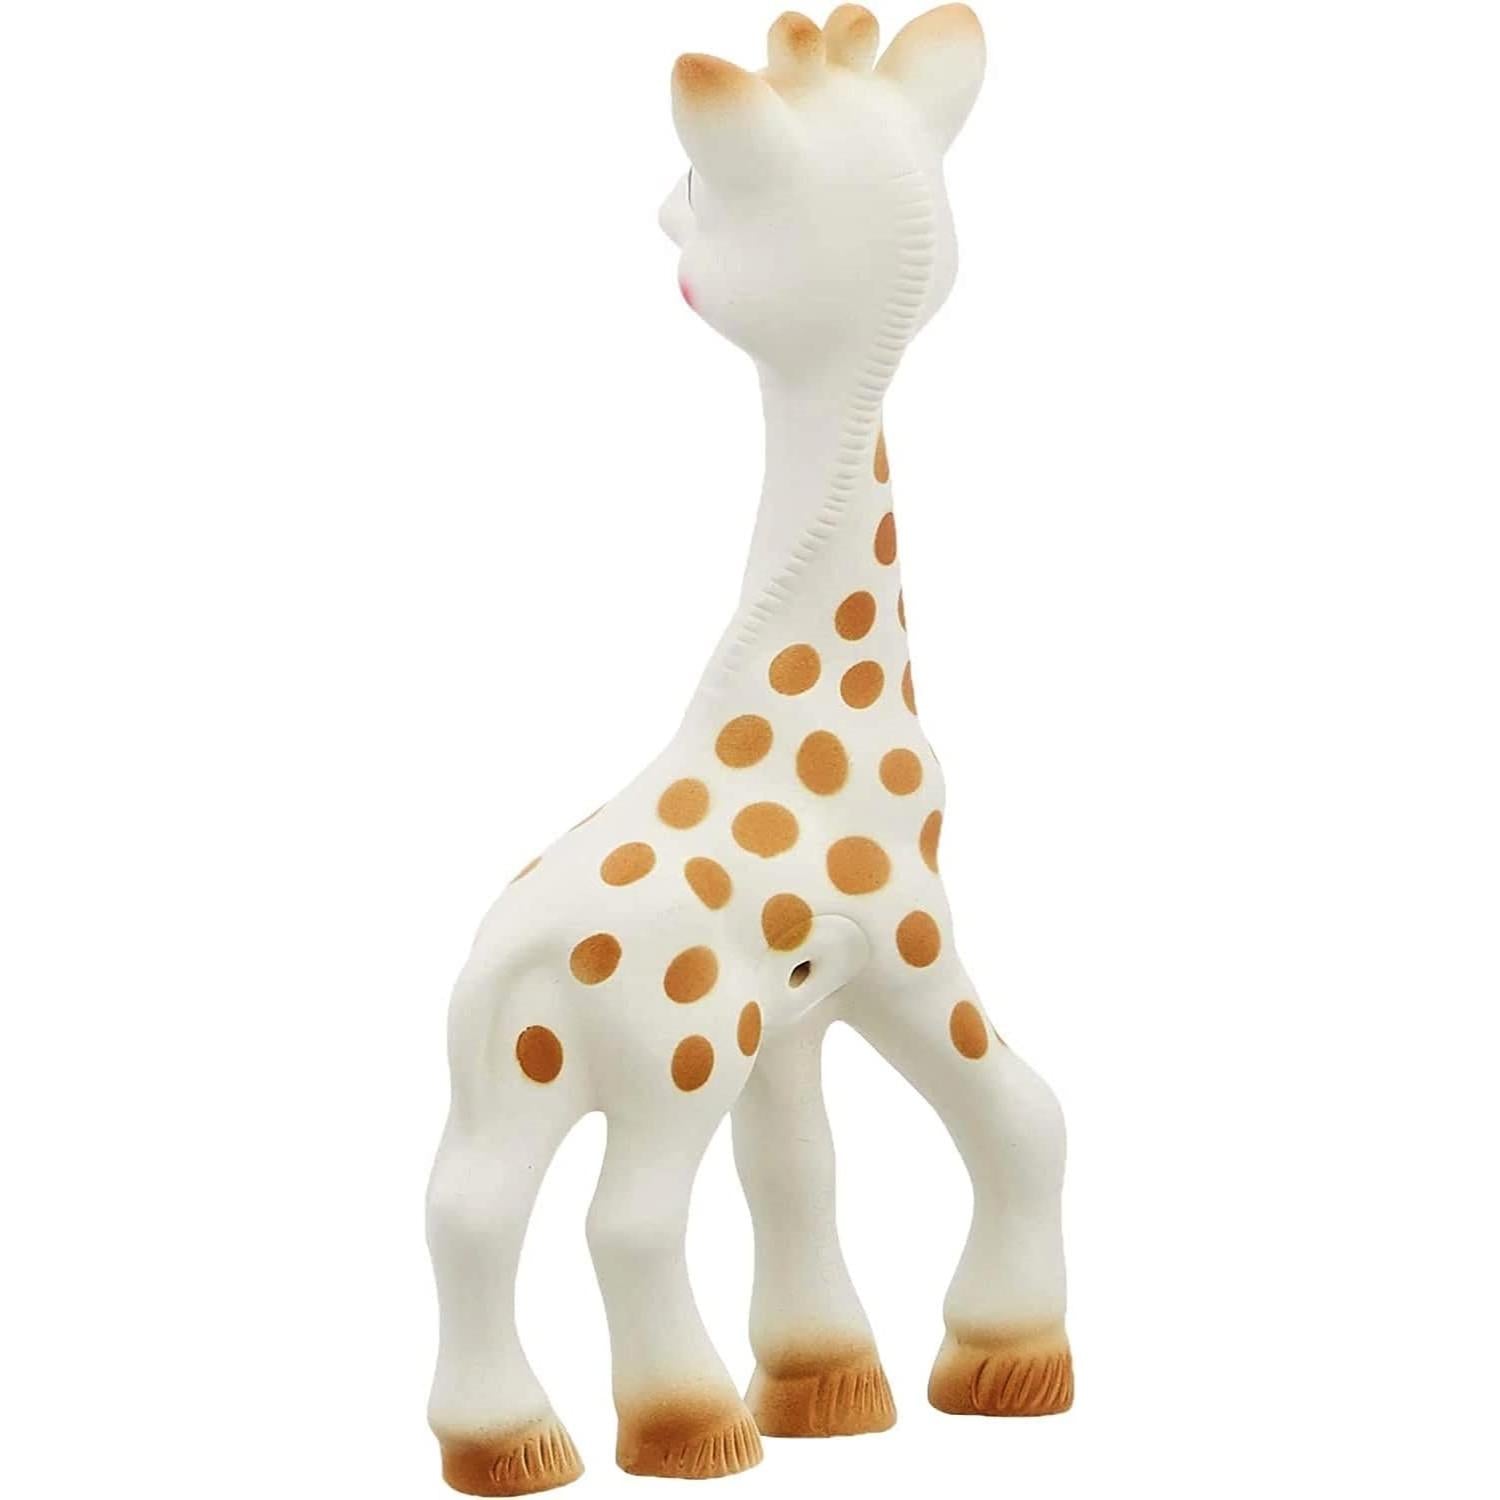 Sophie La Giraffe - Once Upon a Time